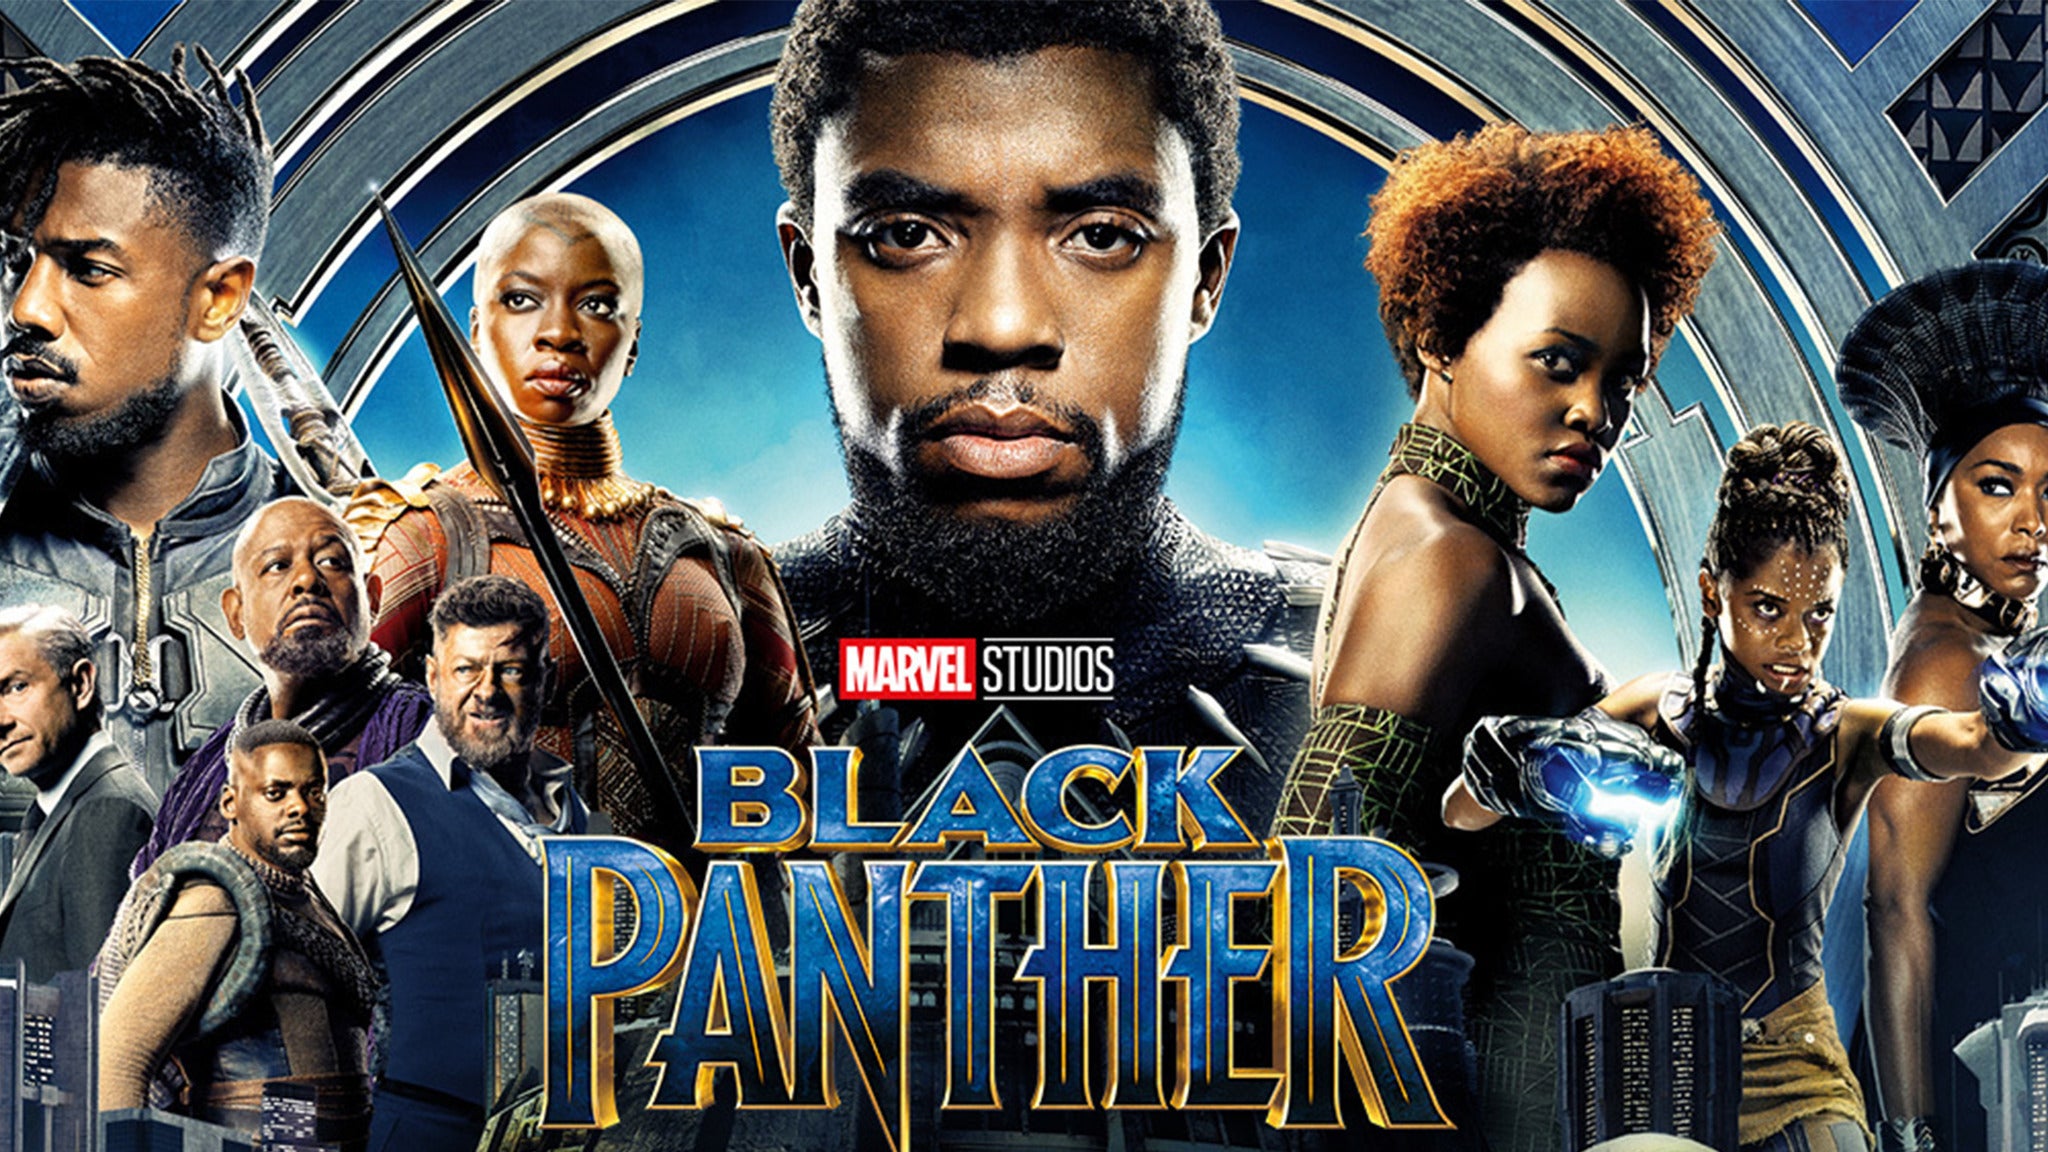 Marvel Studios' Black Panther in Concert - Chicago Philharmonic presale password for early tickets in Chicago